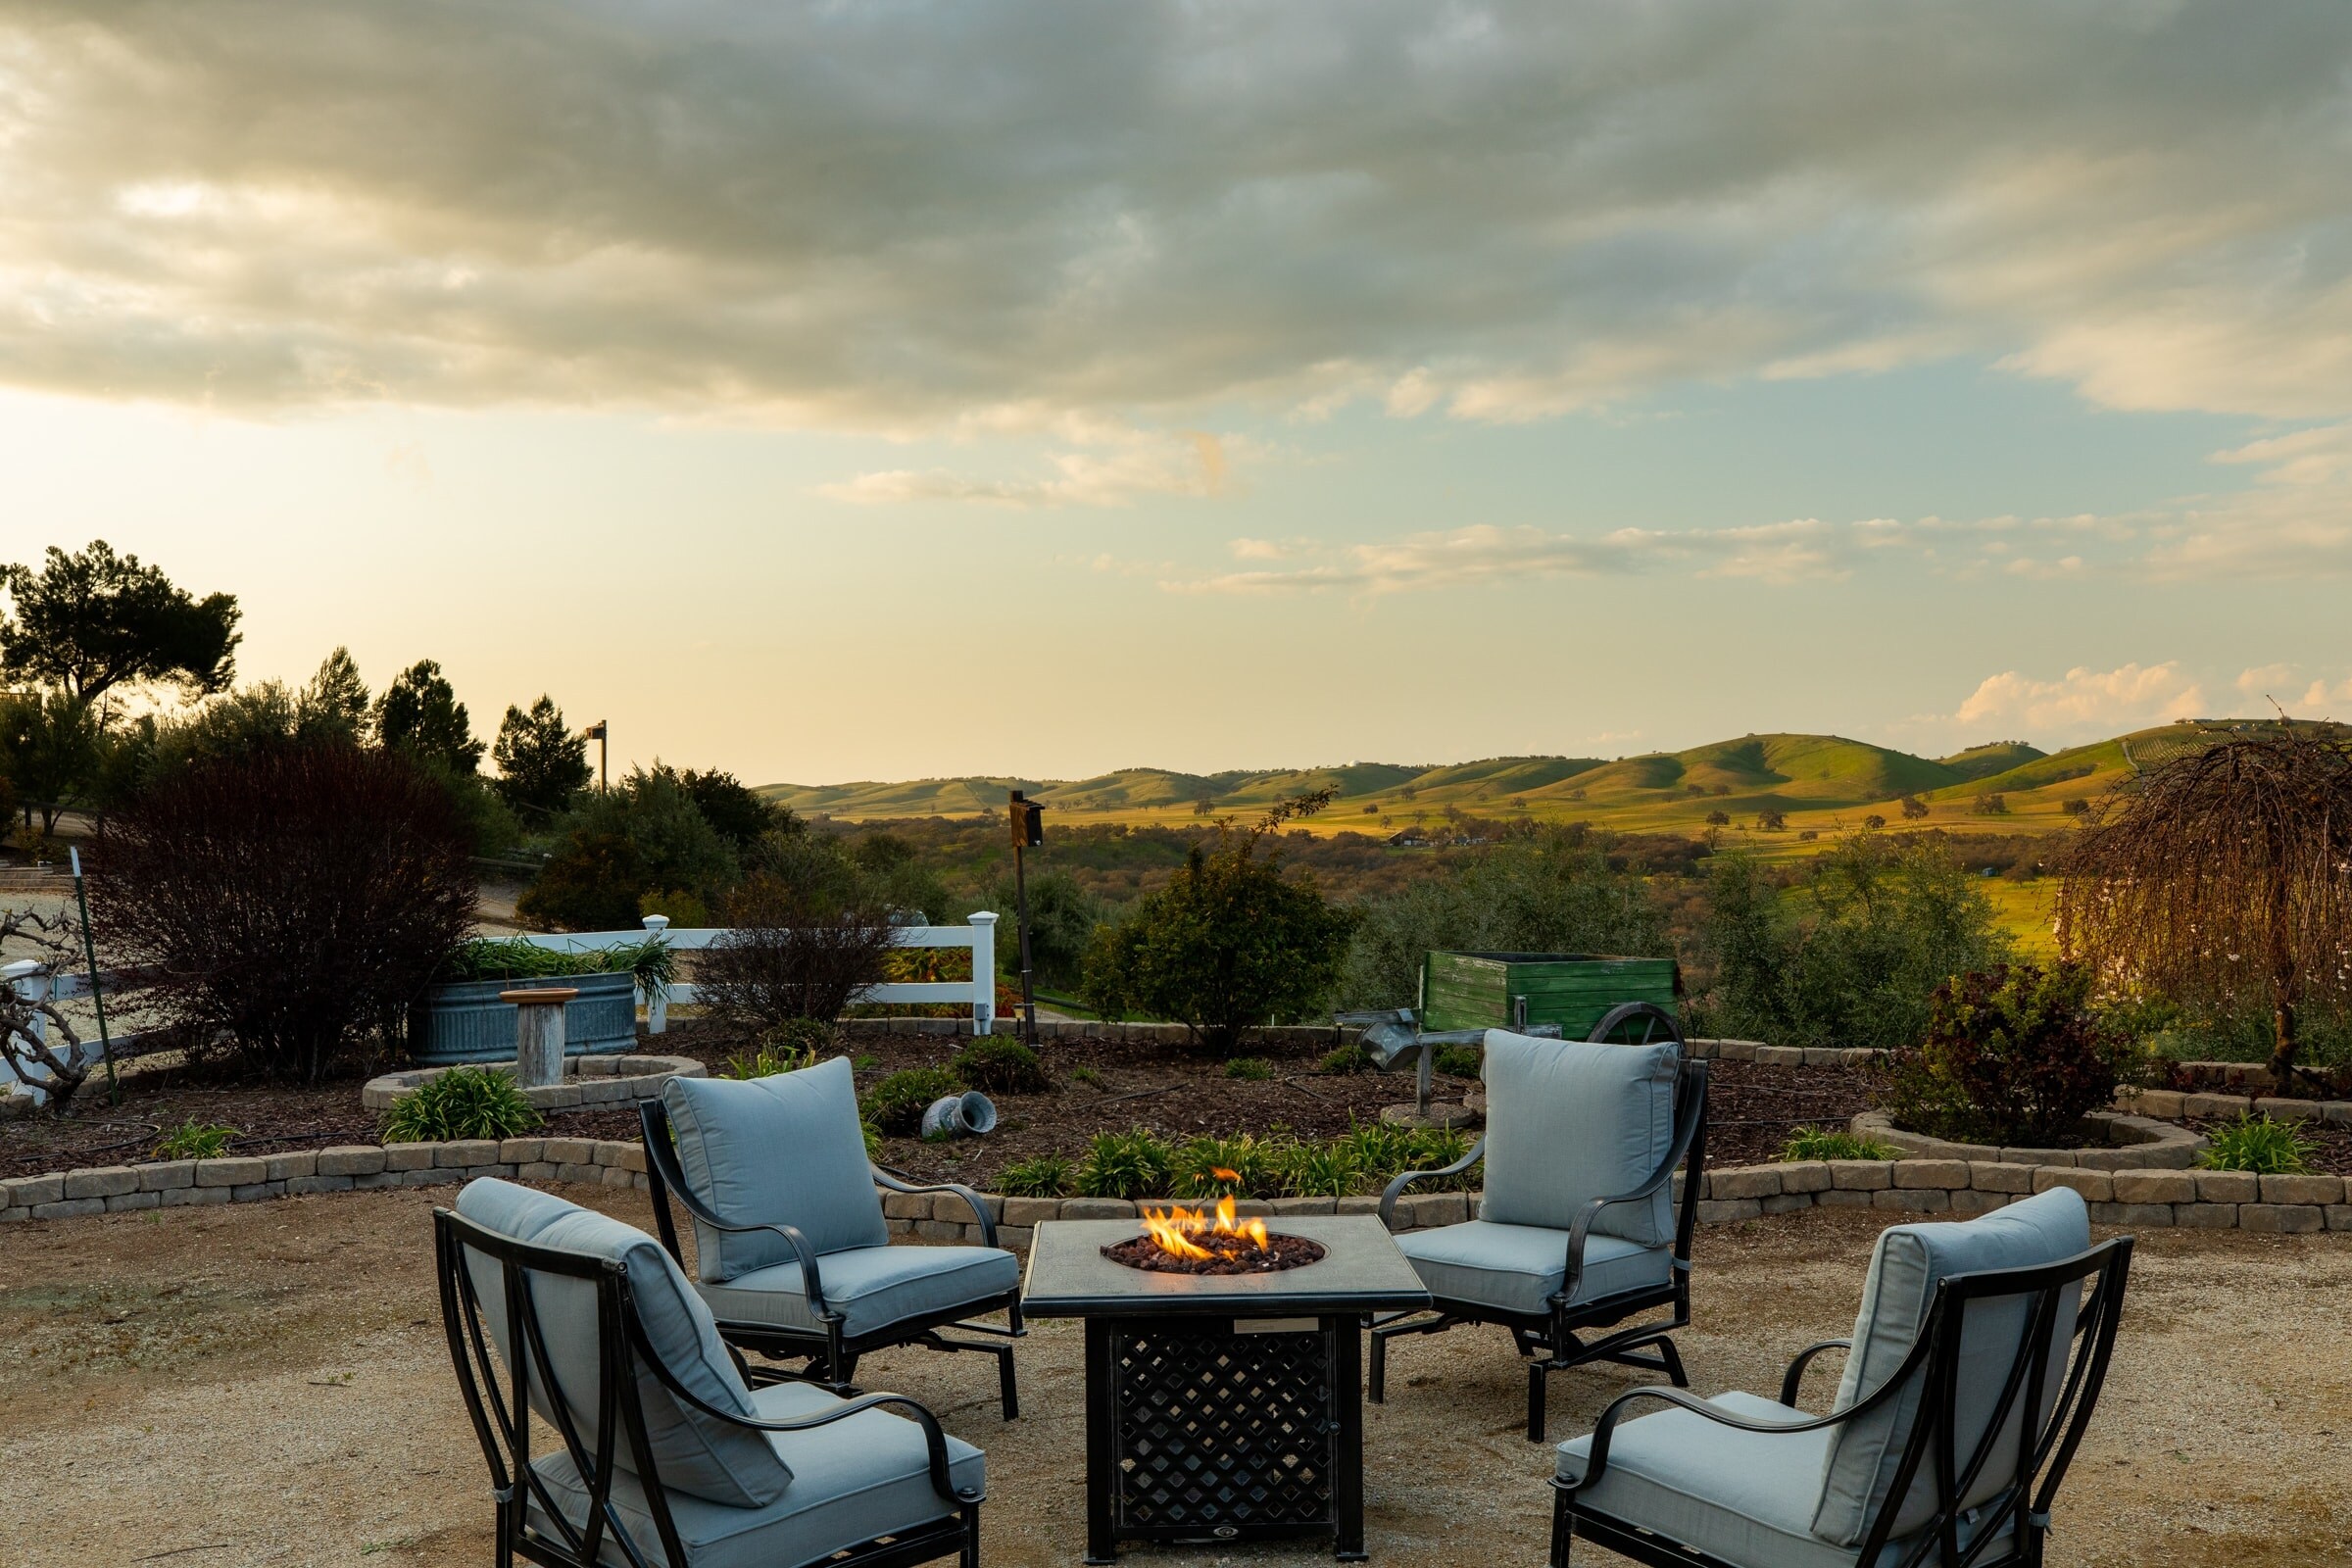 Stay cozy by the firepit with a view.